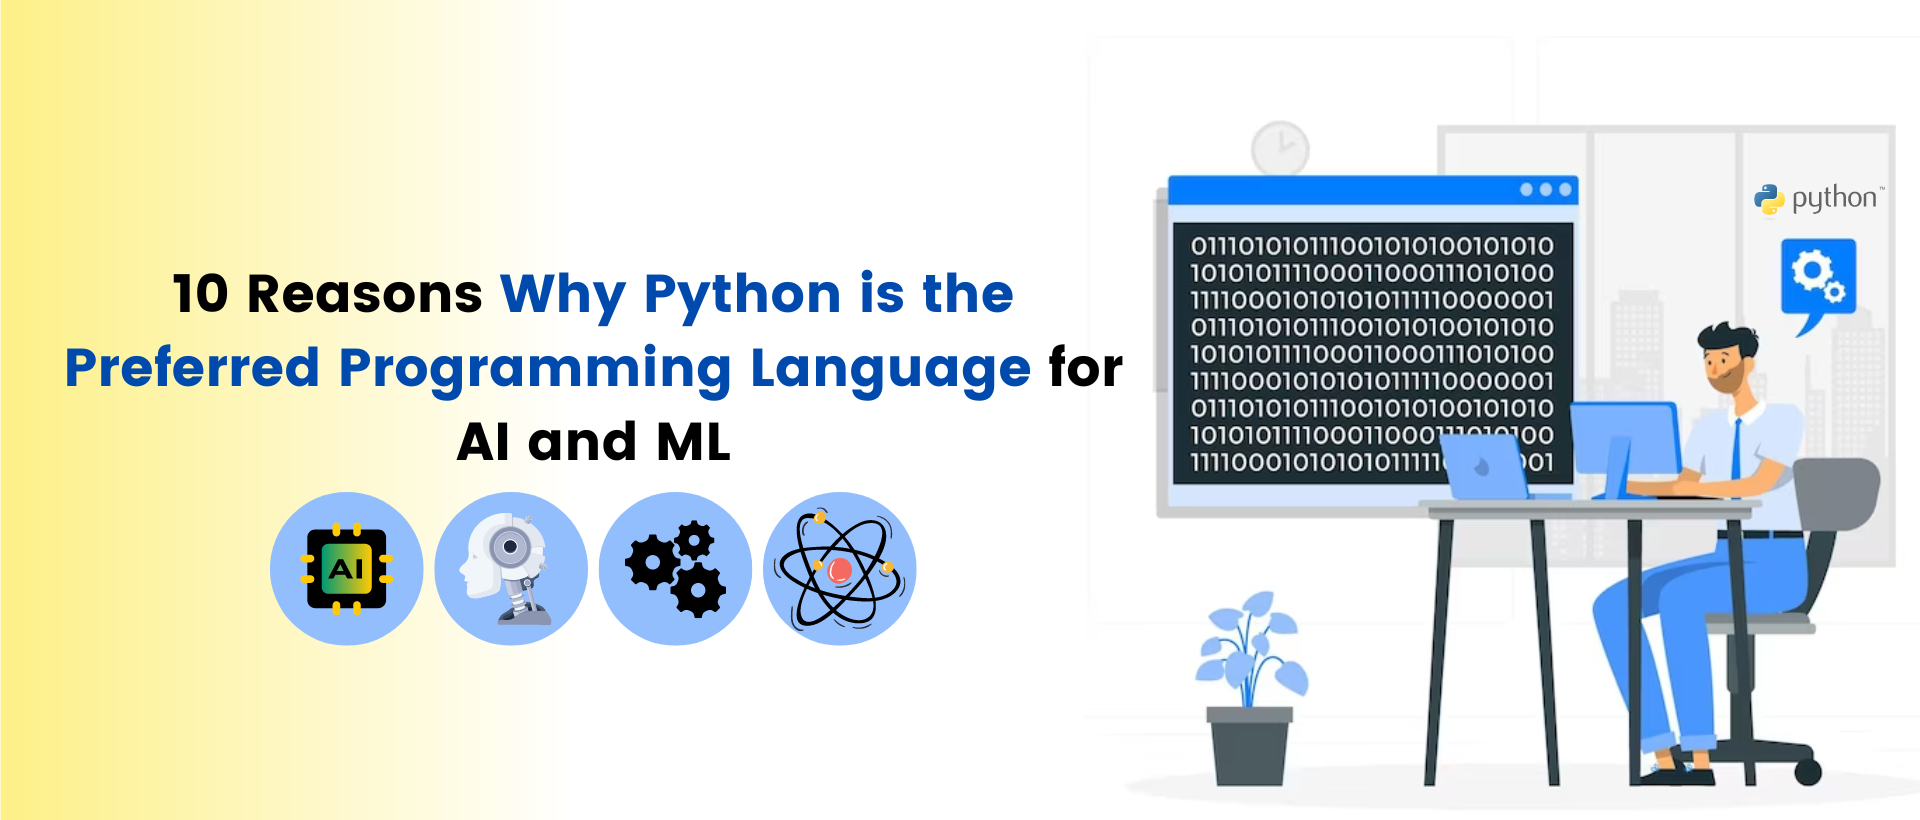 10 reasons why python is the preferred programming language for artificial intelligence and machine learning